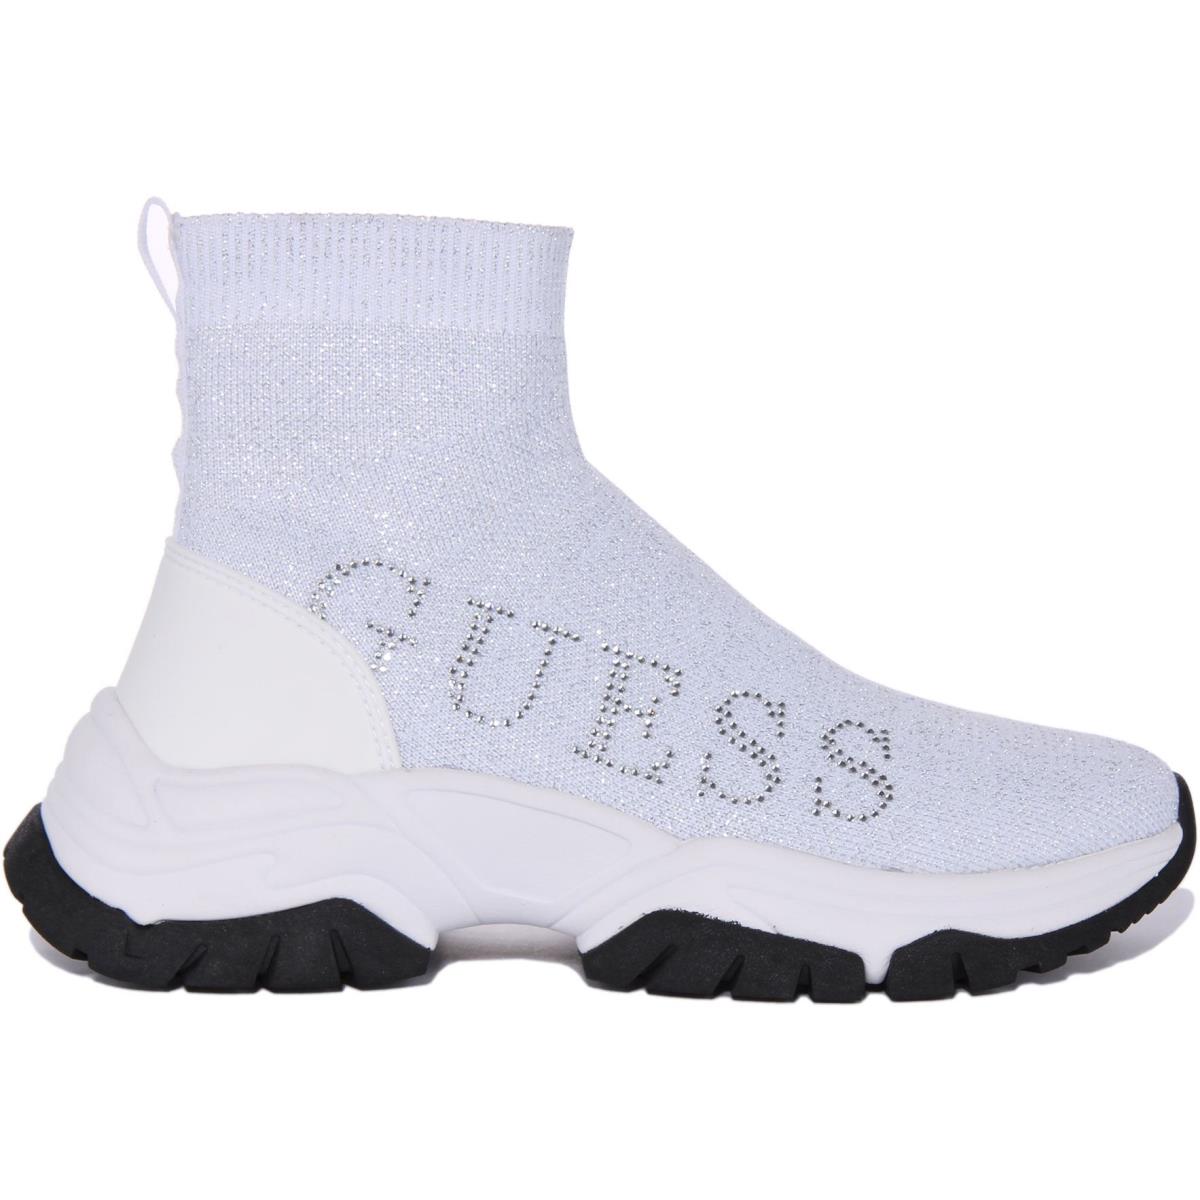 Guess Fl5Nllfab12 Nollen Womens Pull On Fashion Sneaker In White US Size 5 - 10